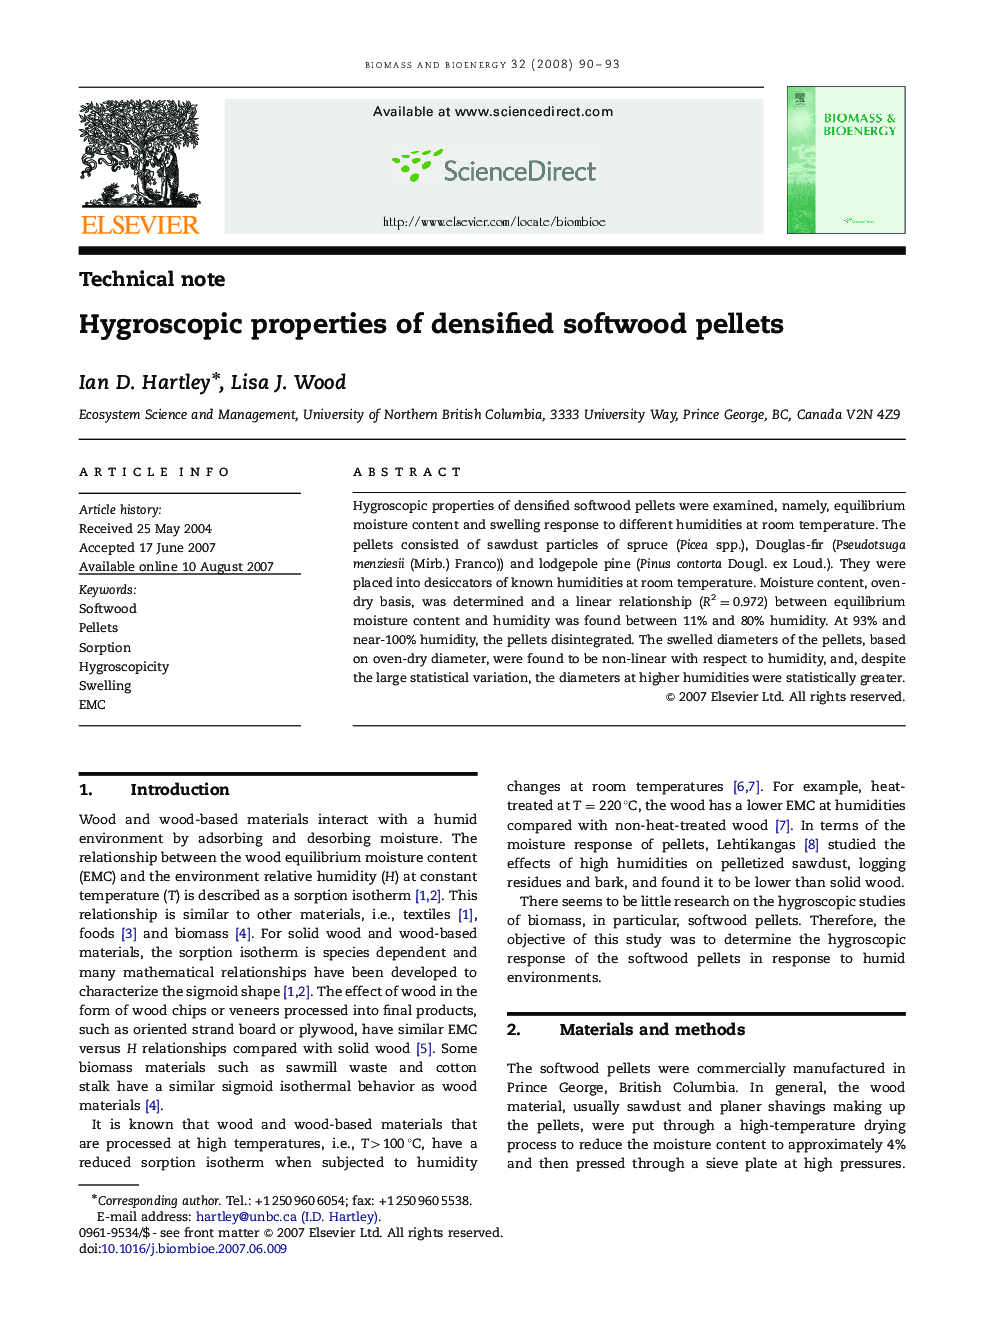 Hygroscopic properties of densified softwood pellets